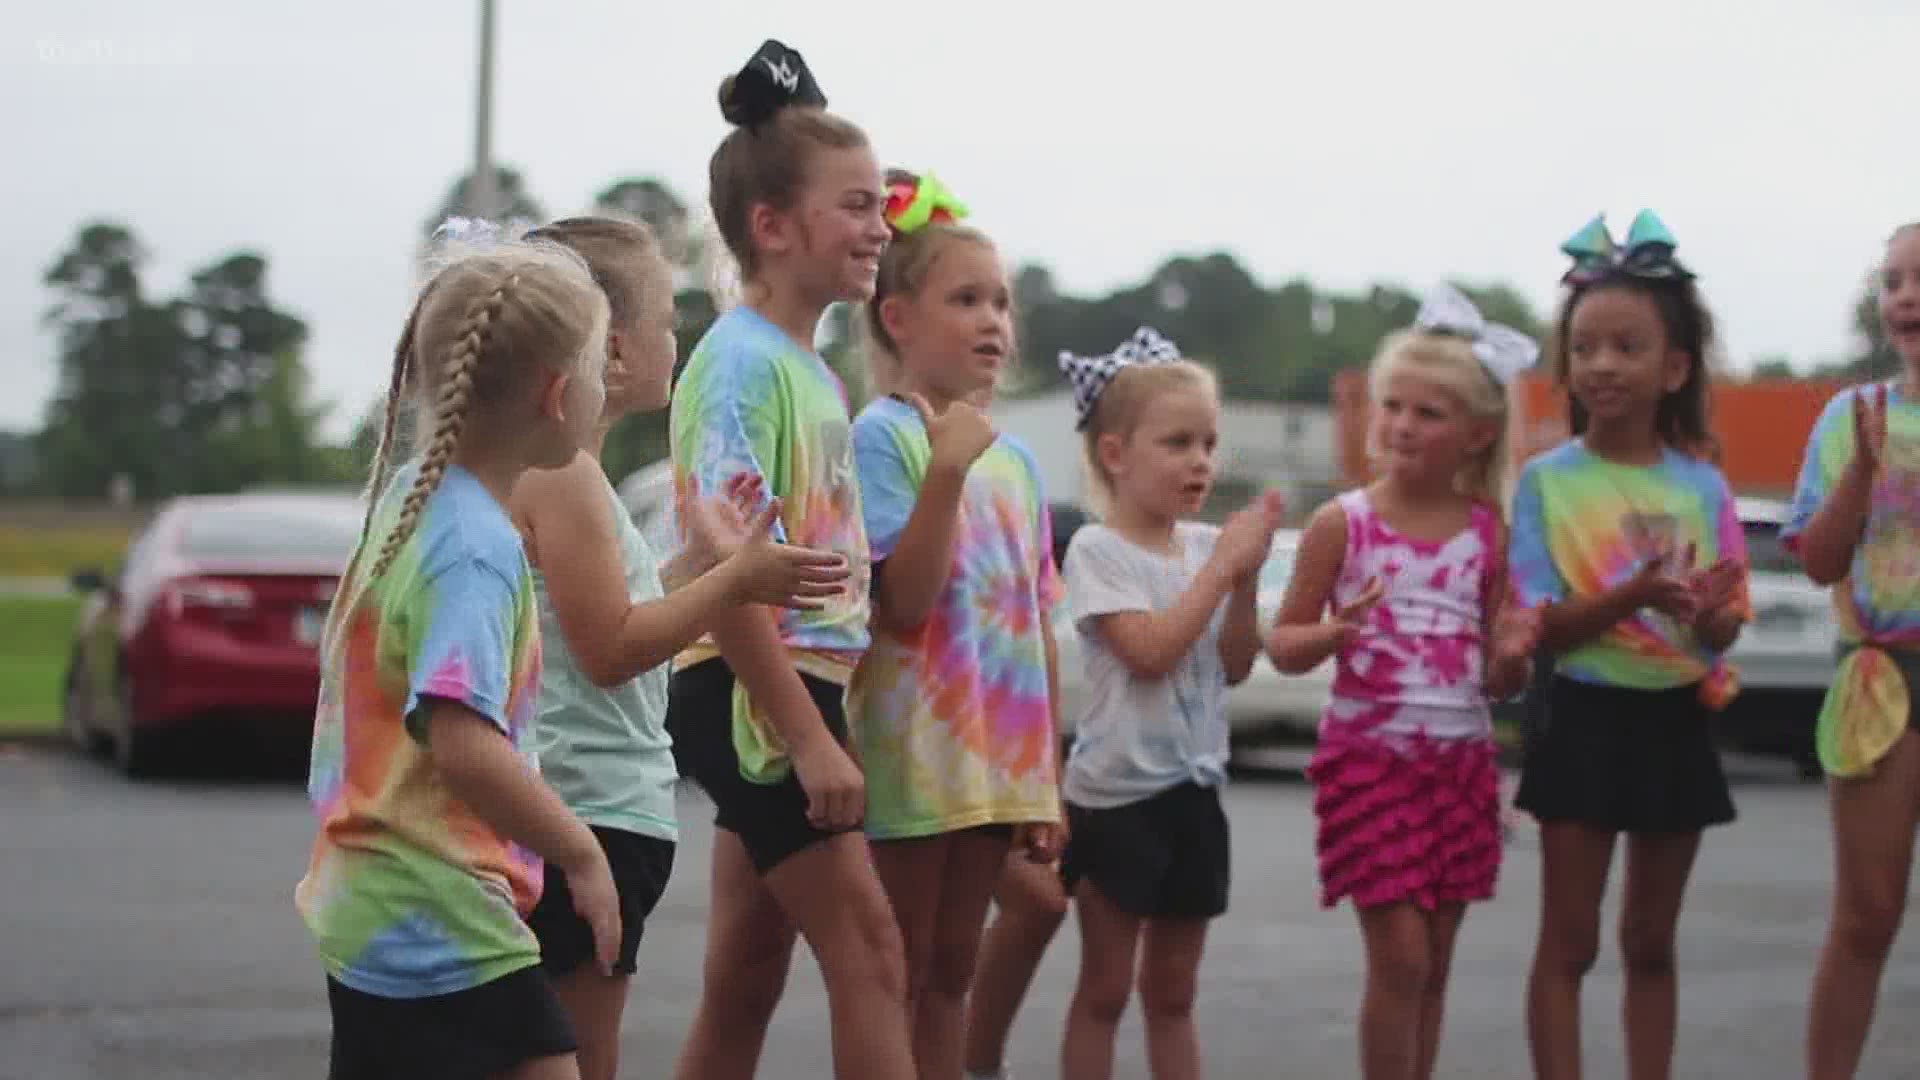 One summer camp in Saline County decided to take lemons and turn them into lemonade!